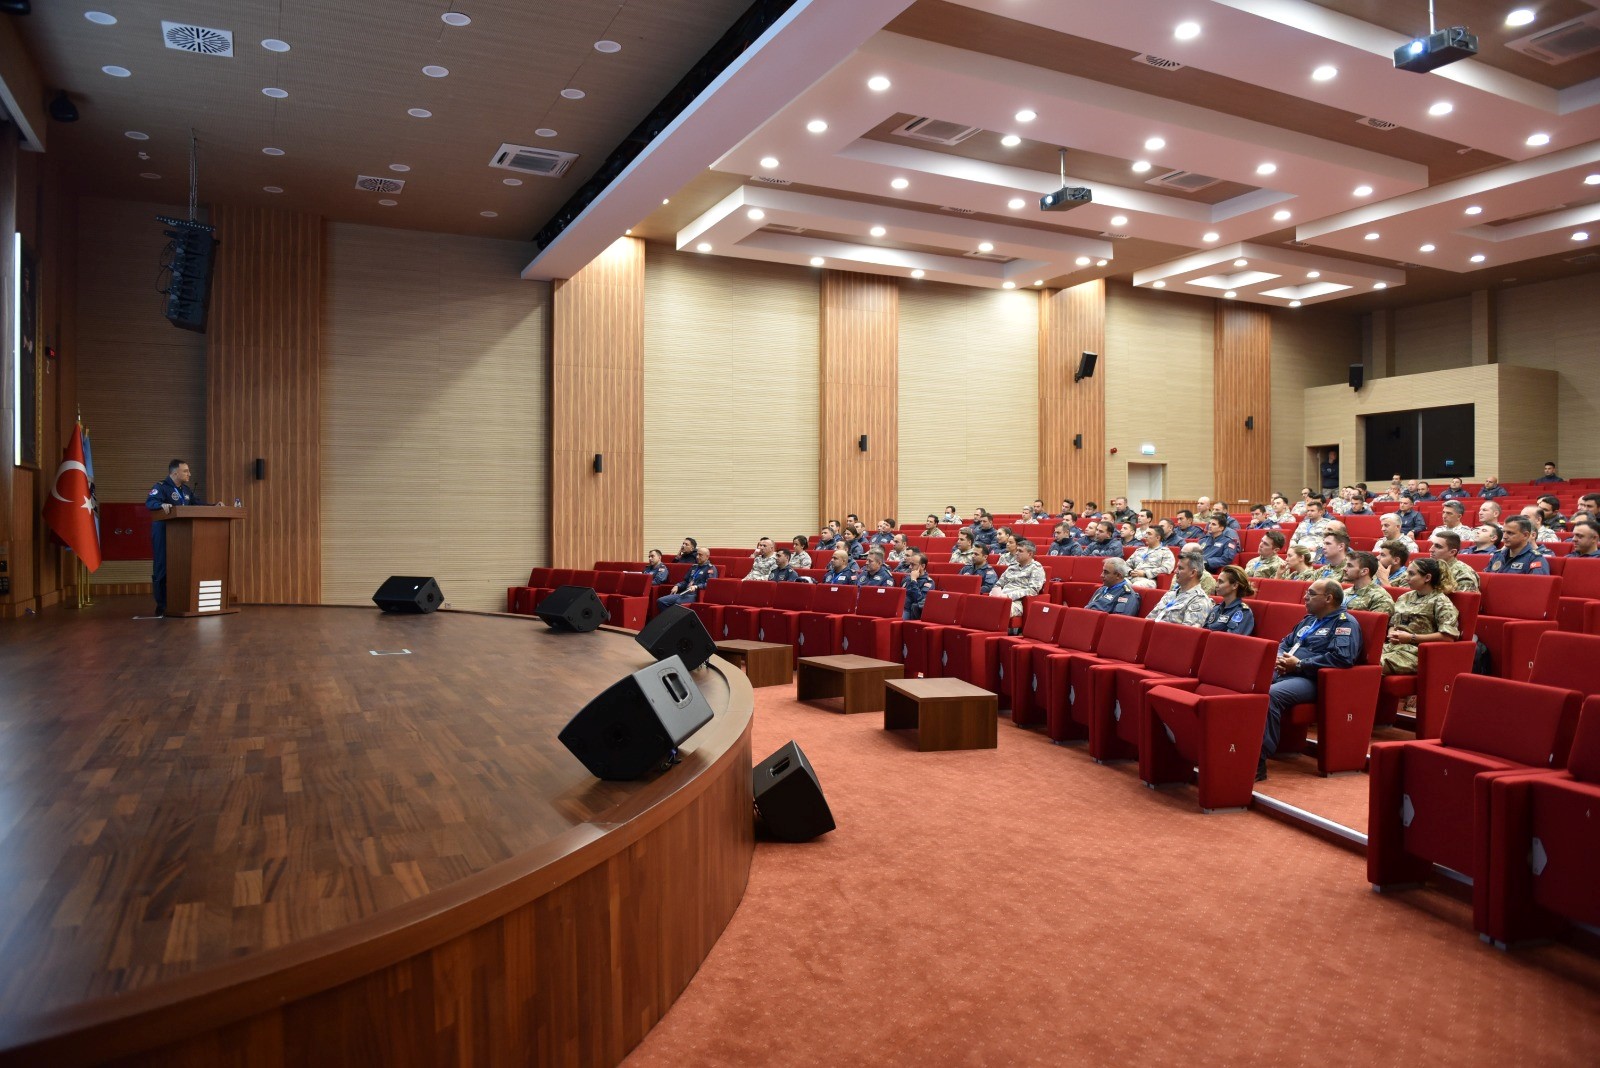 Image shows personnel inside lecture room.